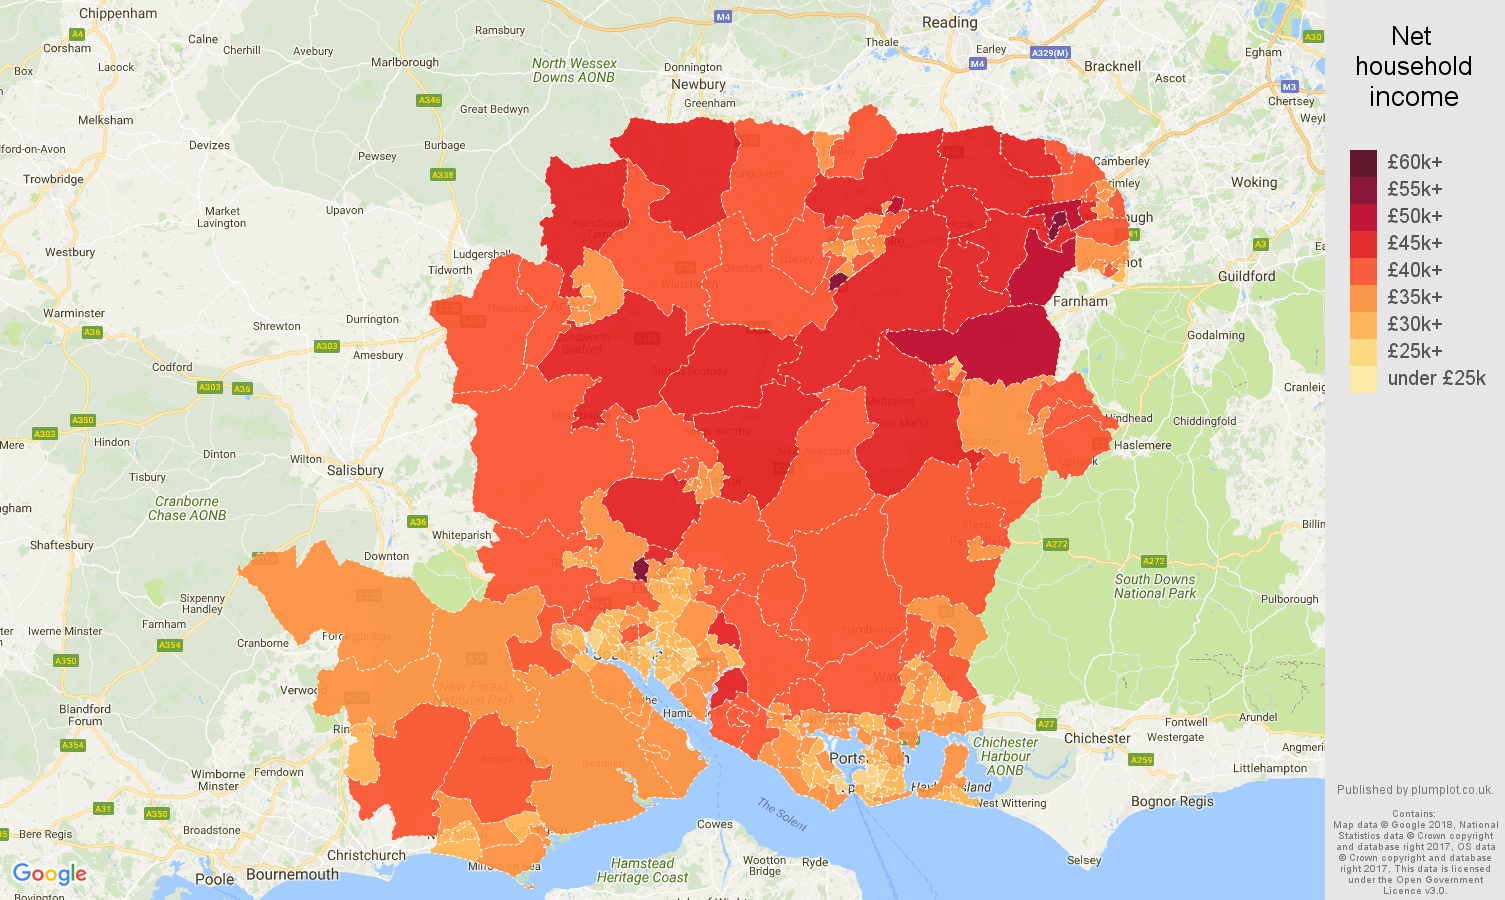 Hampshire net household income map